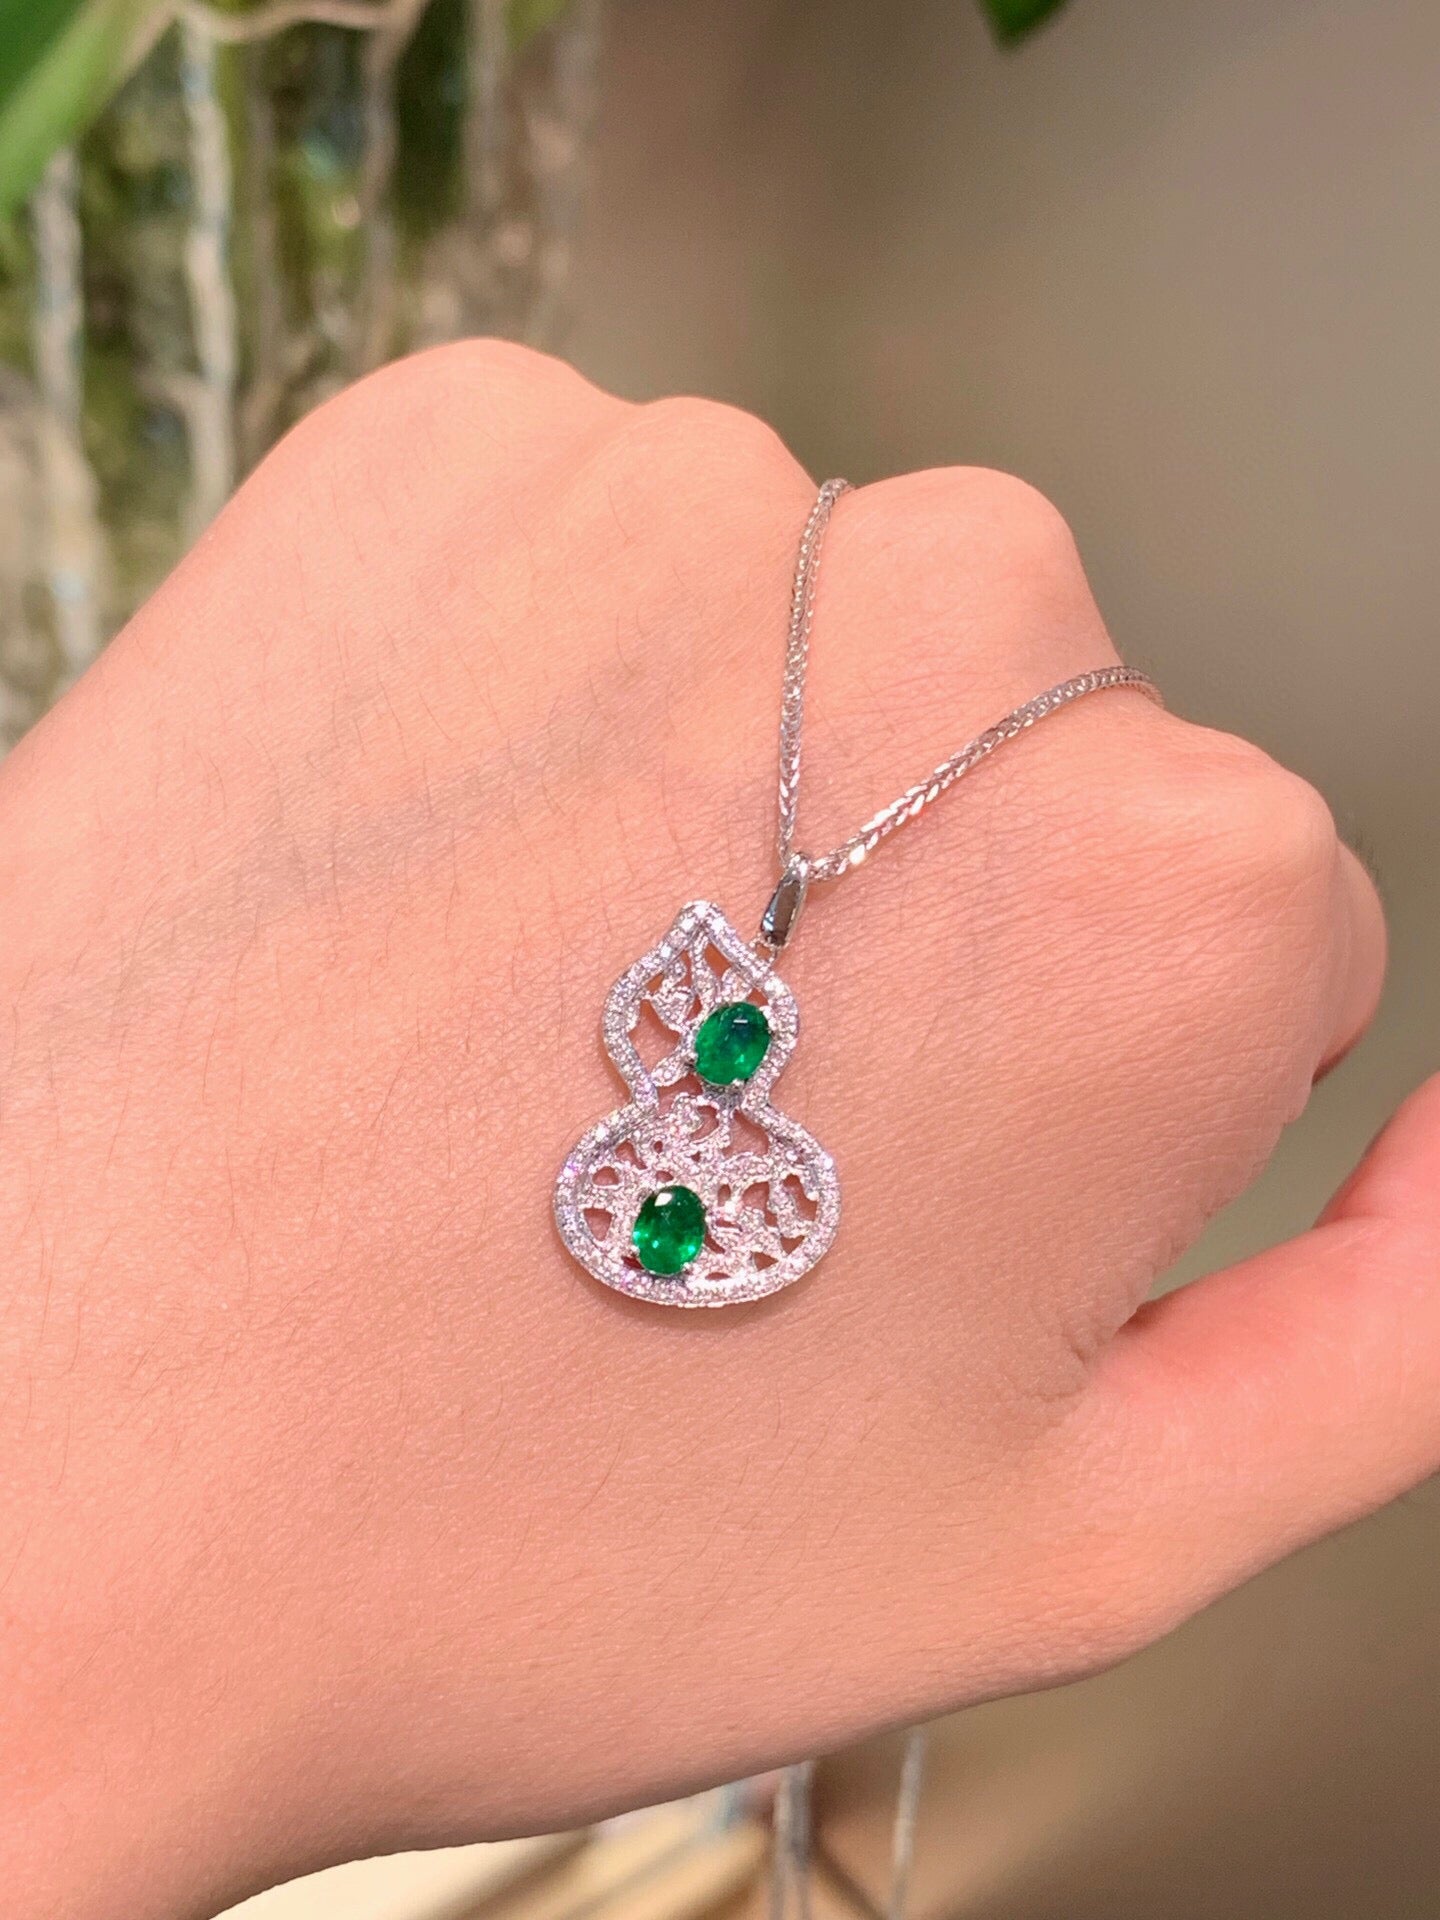 18k White Gold With Emerald Gourd Pendant Earrings